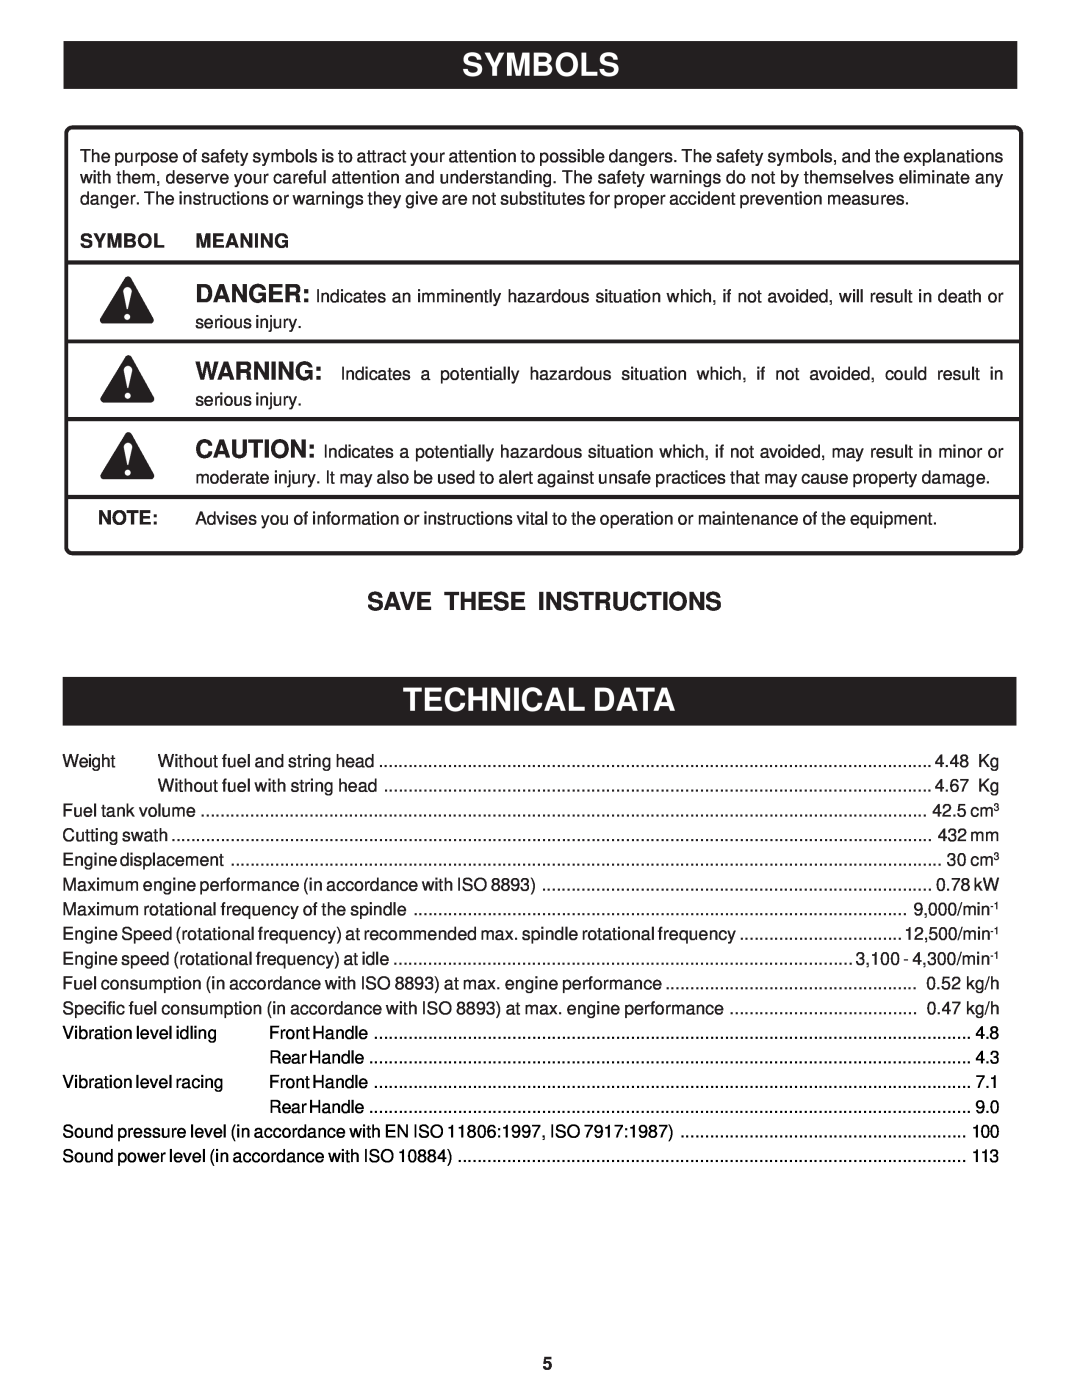 Ryobi Outdoor PLT3043A, RY70101A manual Technical Data, Symbol Meaning, Symbols, Save These Instructions 